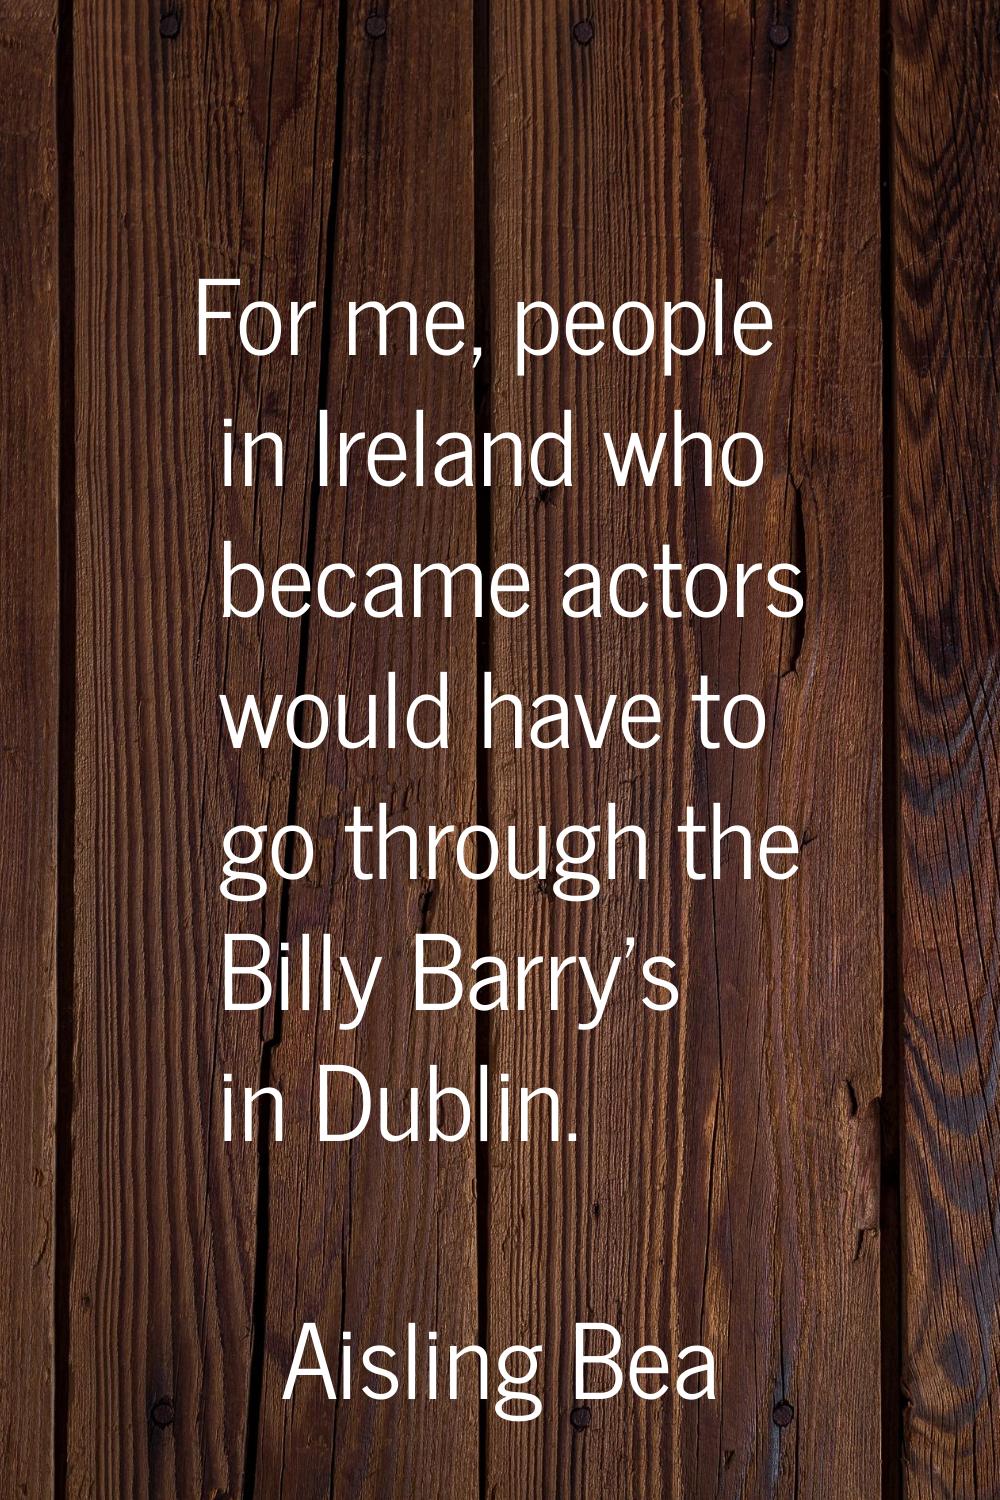 For me, people in Ireland who became actors would have to go through the Billy Barry's in Dublin.